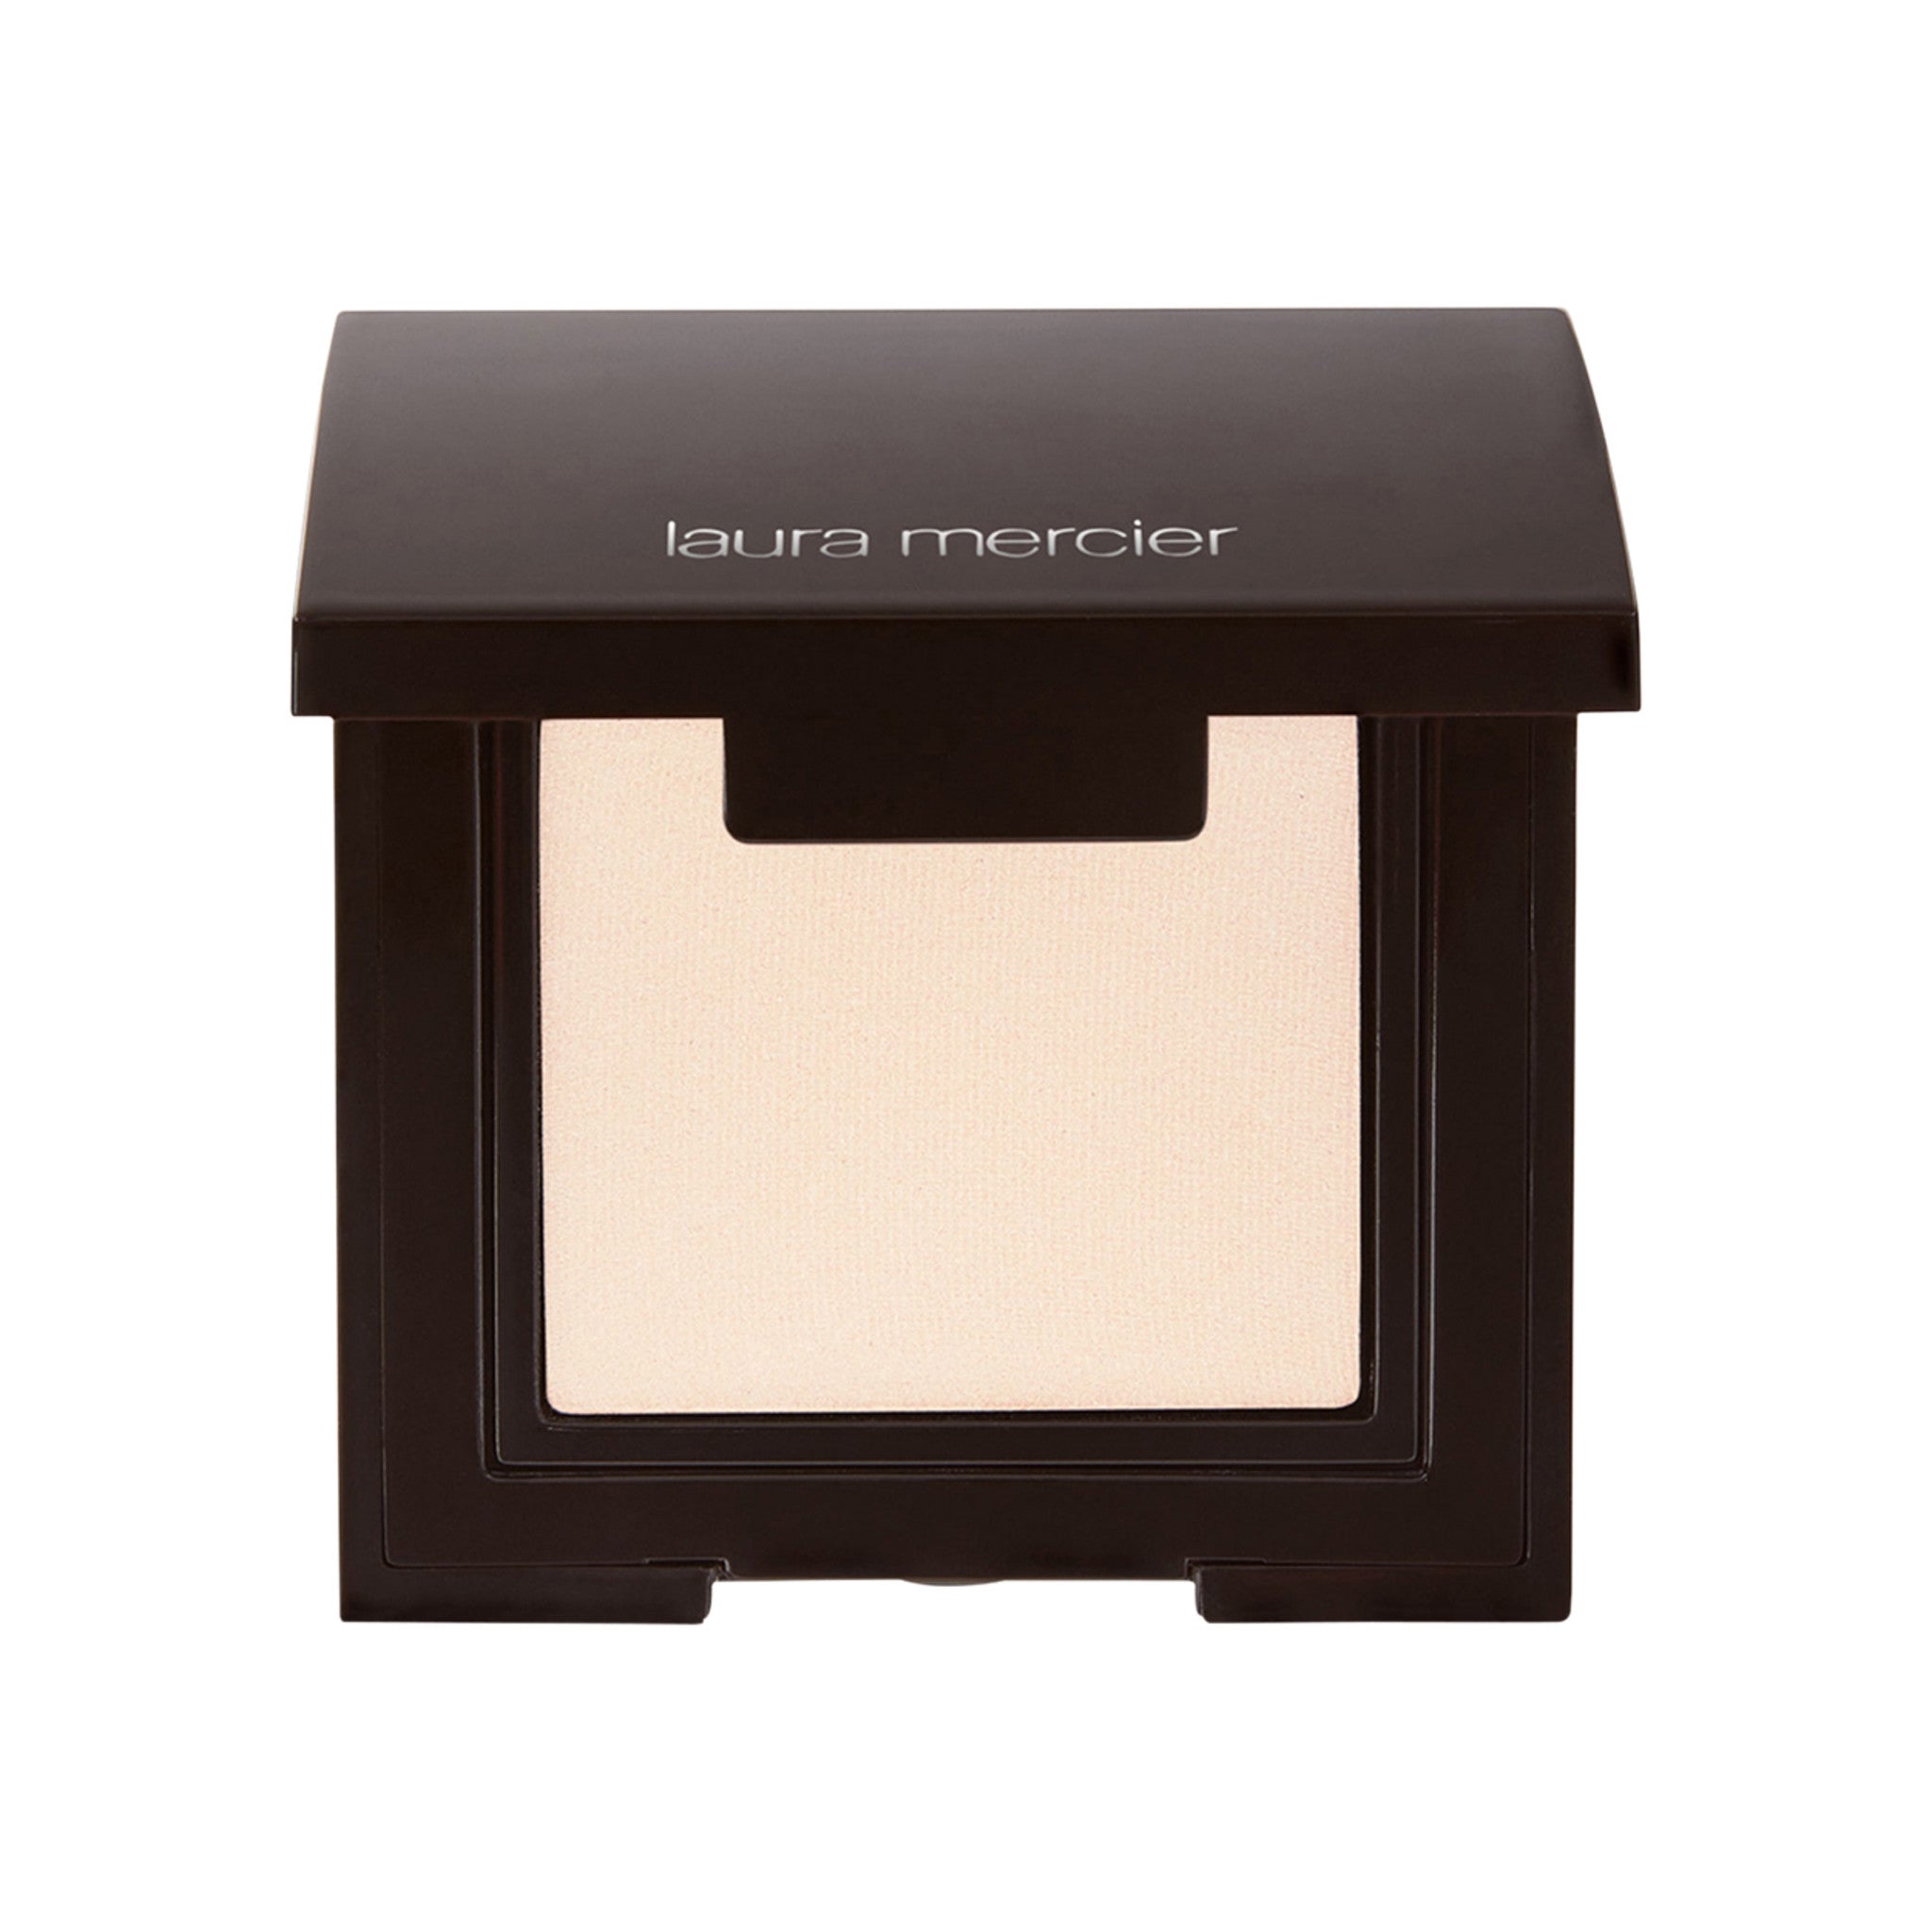 Laura Mercier Matte Eye Colour Color/Shade variant: Buttercream main image. This product is in the color nude